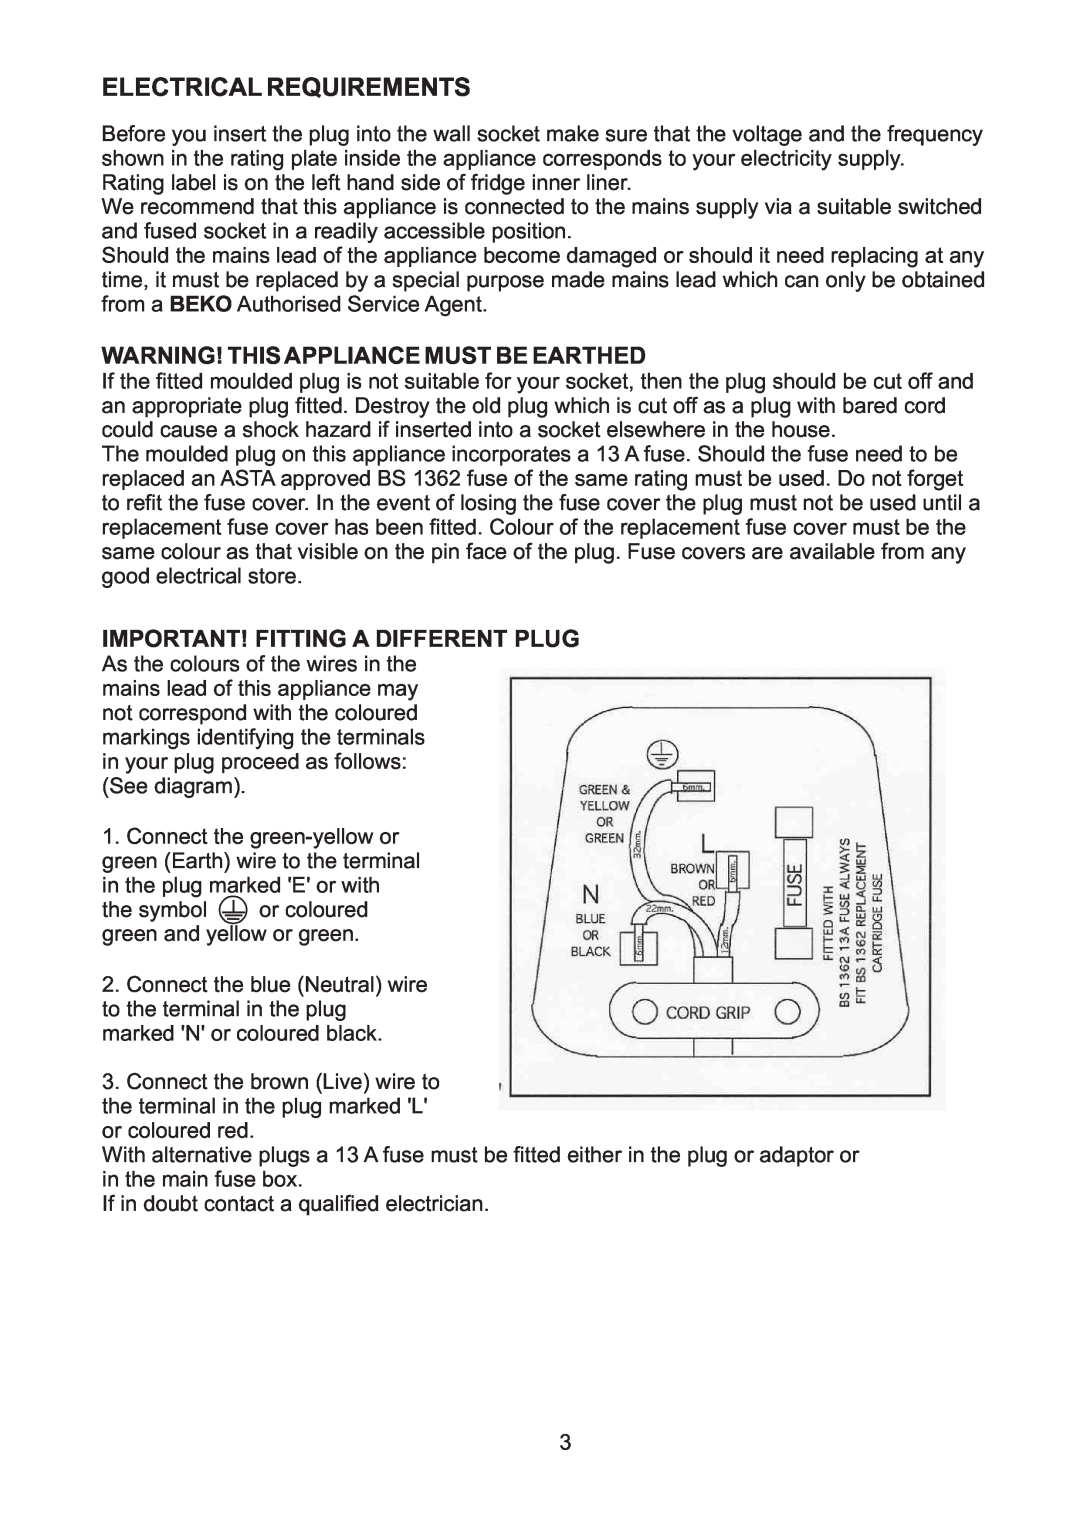 Beko CFD6643 manual Electrical Requirements, Warning! This Appliance Must Be Earthed, Important!Fitting A Differentplug 